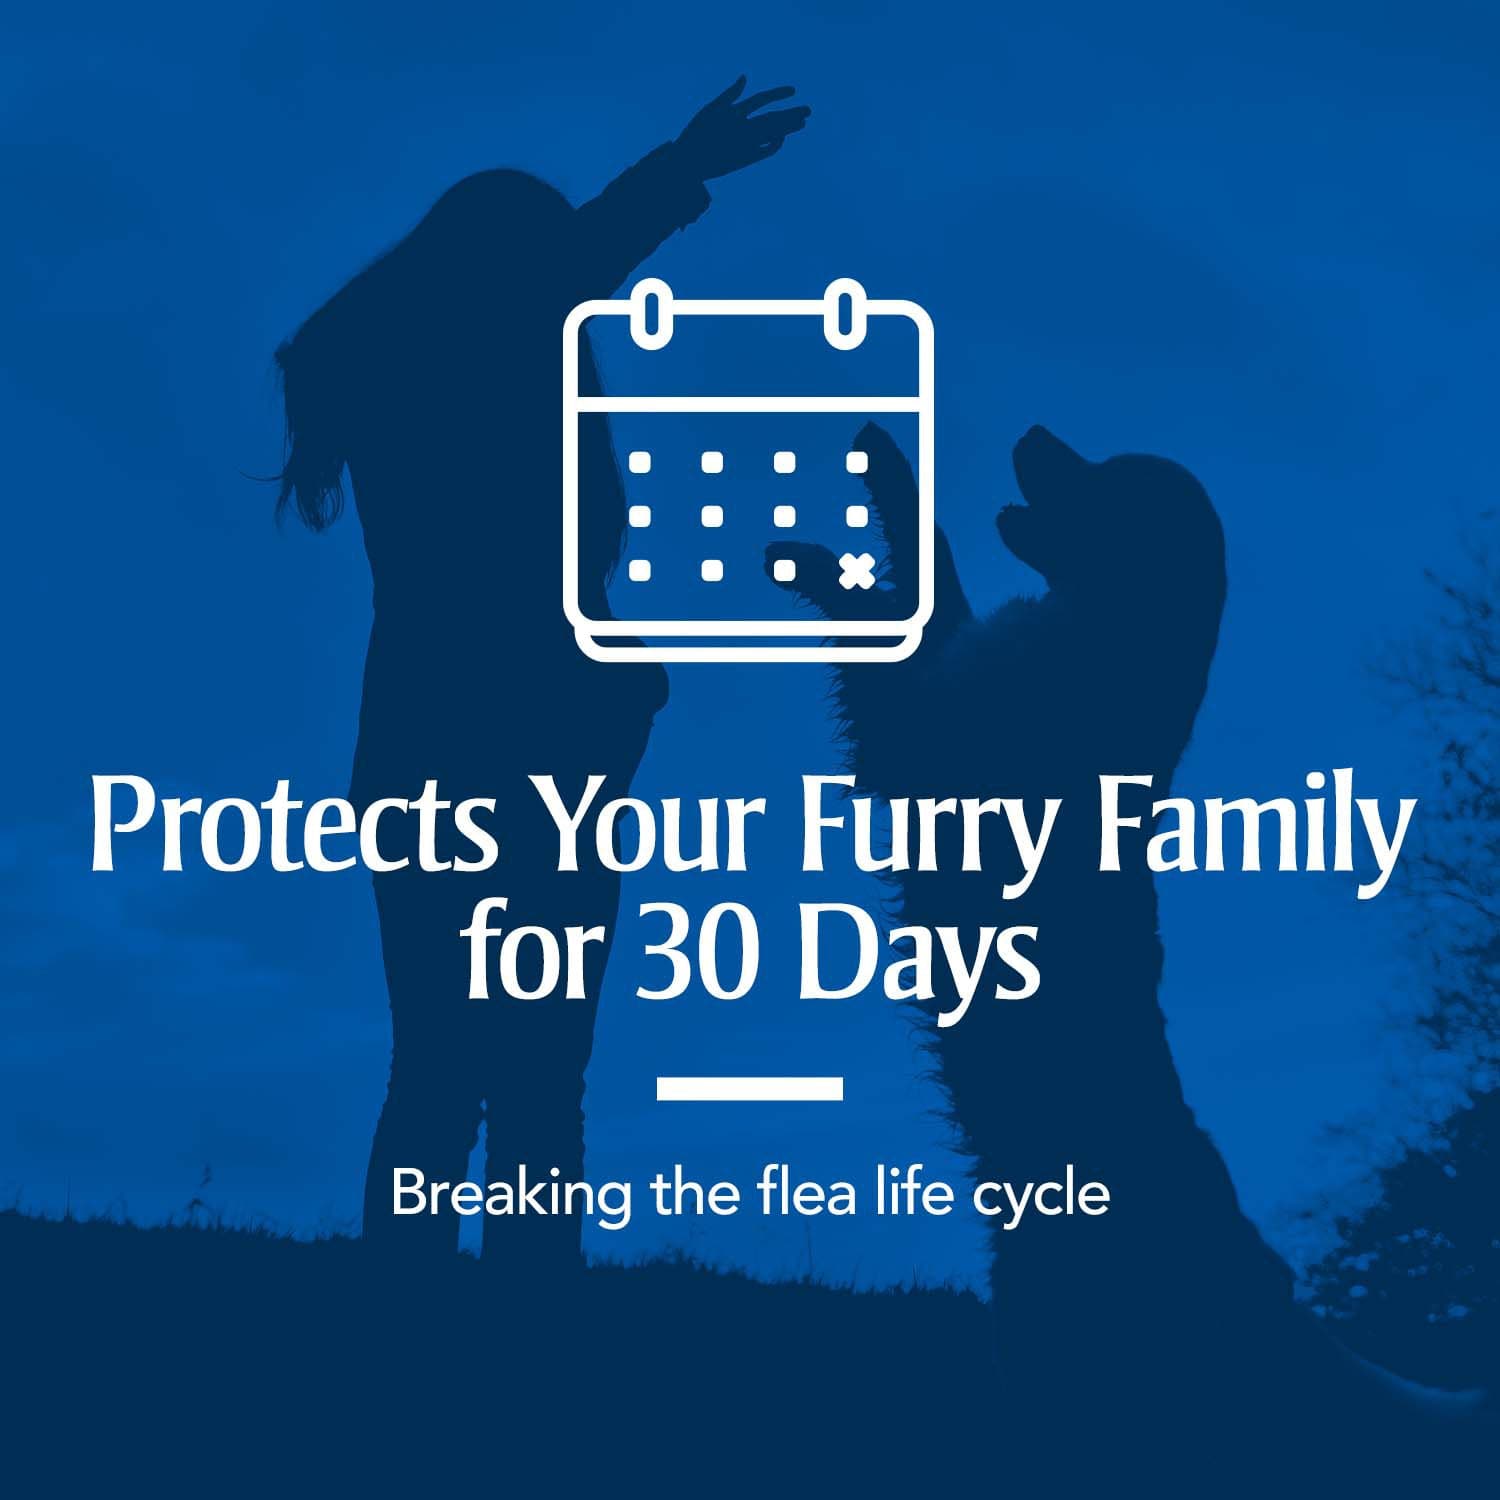 protects your furry family for 30 days with current product